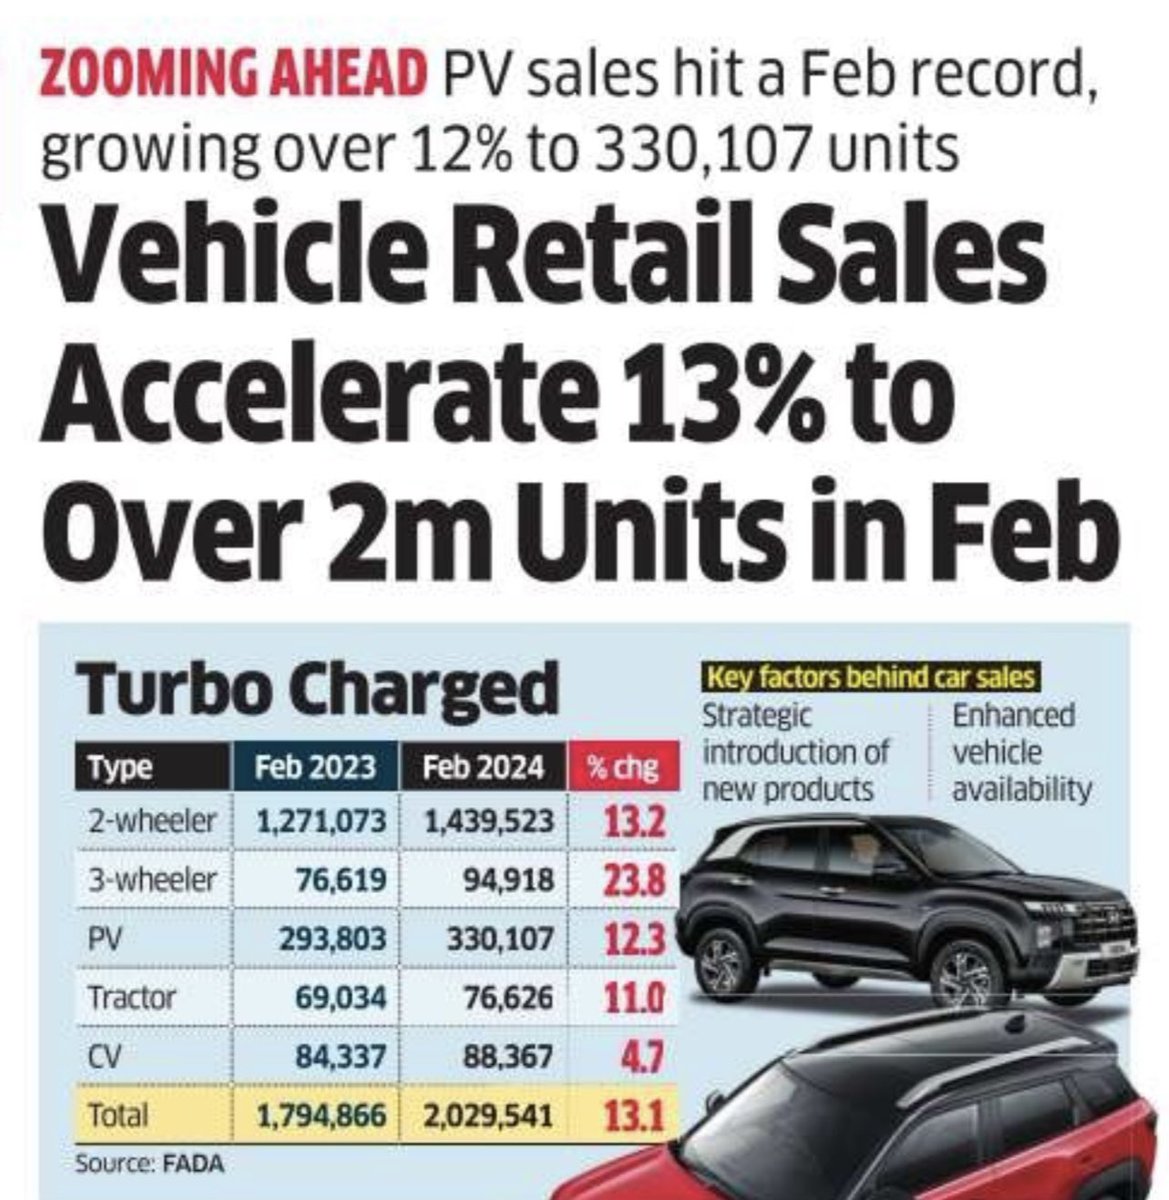 Two Million plus units in a month. Excellent numbers. #automobile #PassengerVehicle #FADA #India 🇮🇳